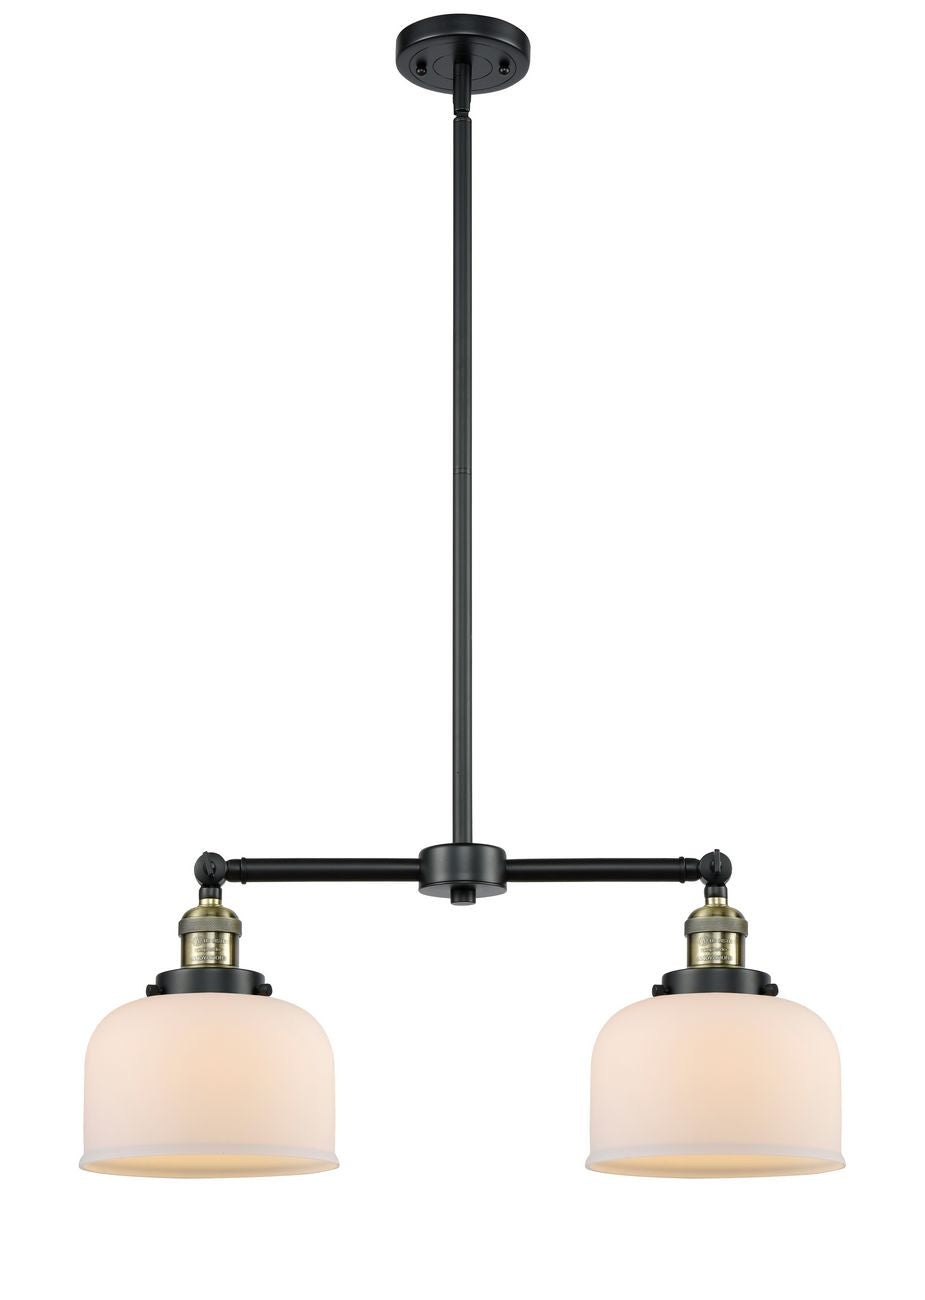 209-BAB-G71 2-Light 21" Black Antique Brass Island Light - Matte White Cased Large Bell Glass - LED Bulb - Dimmensions: 21 x 5 x 10<br>Minimum Height : 20.875<br>Maximum Height : 44.875 - Sloped Ceiling Compatible: Yes